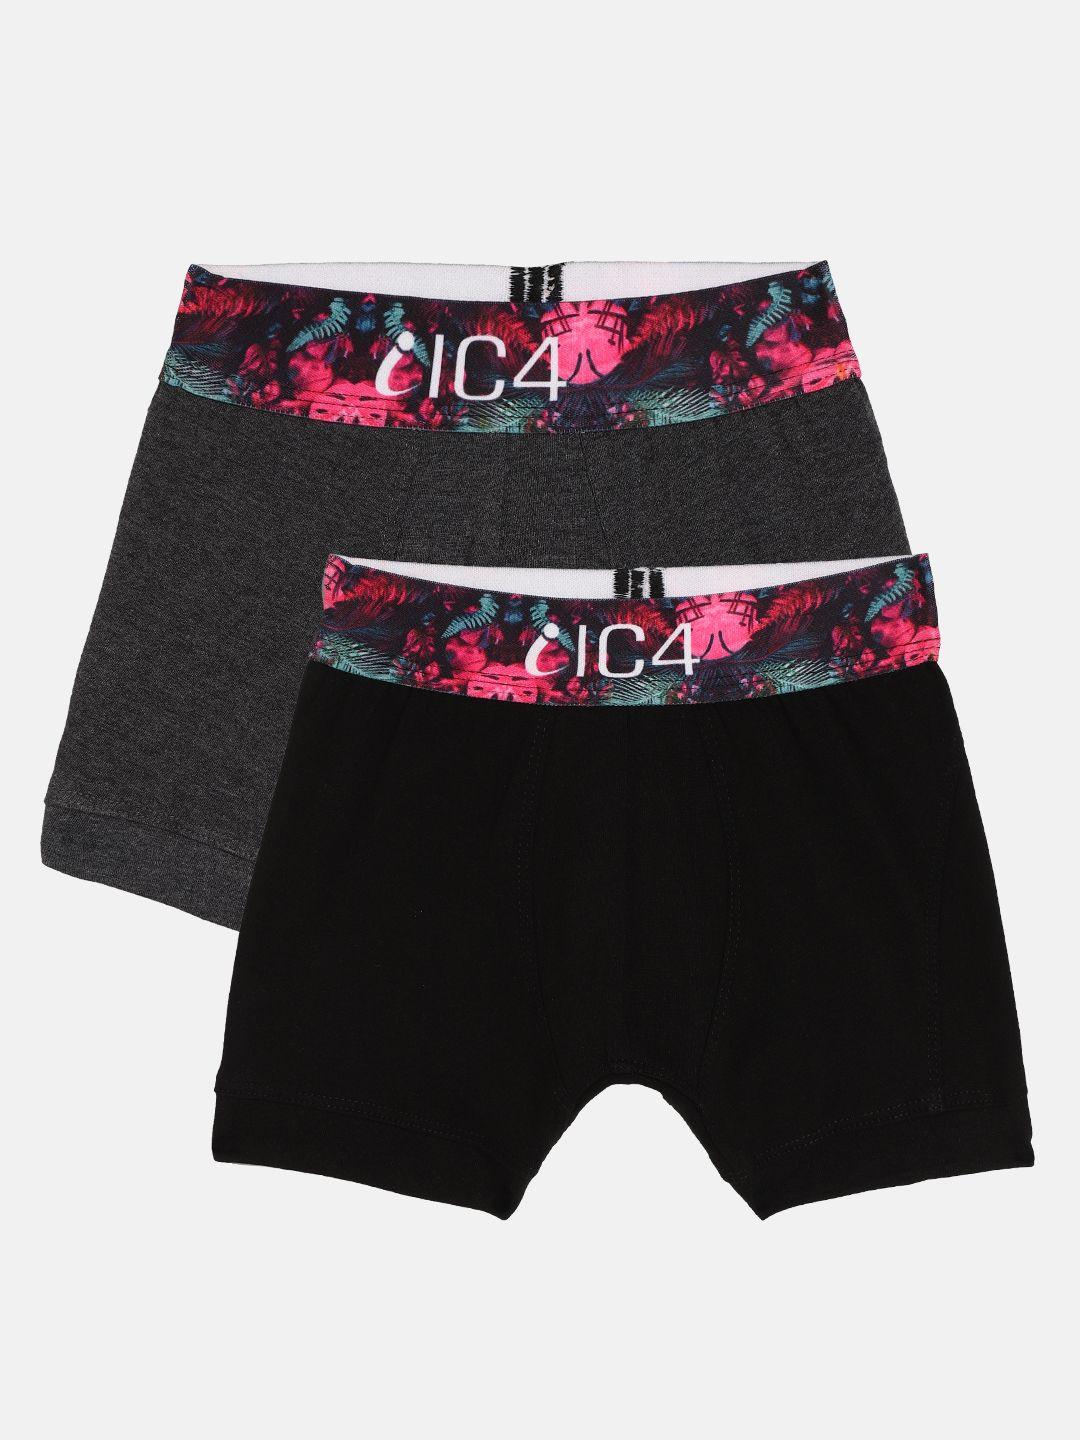 ic4 boys pack of 2 charcoal grey & black solid trunks 0b-c-2001p2